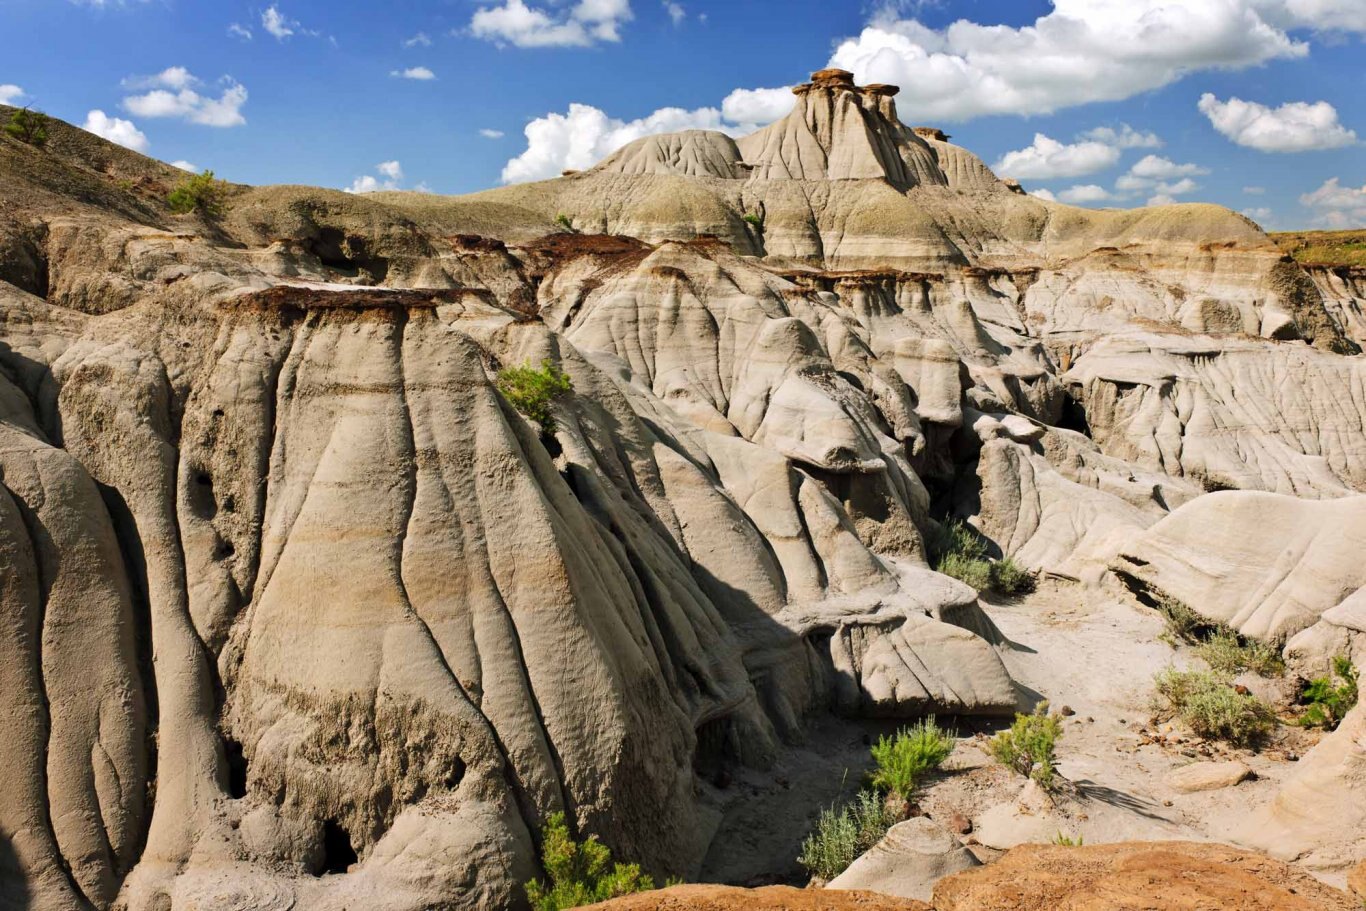 STUNNING RIDE TO THE BADLANDS